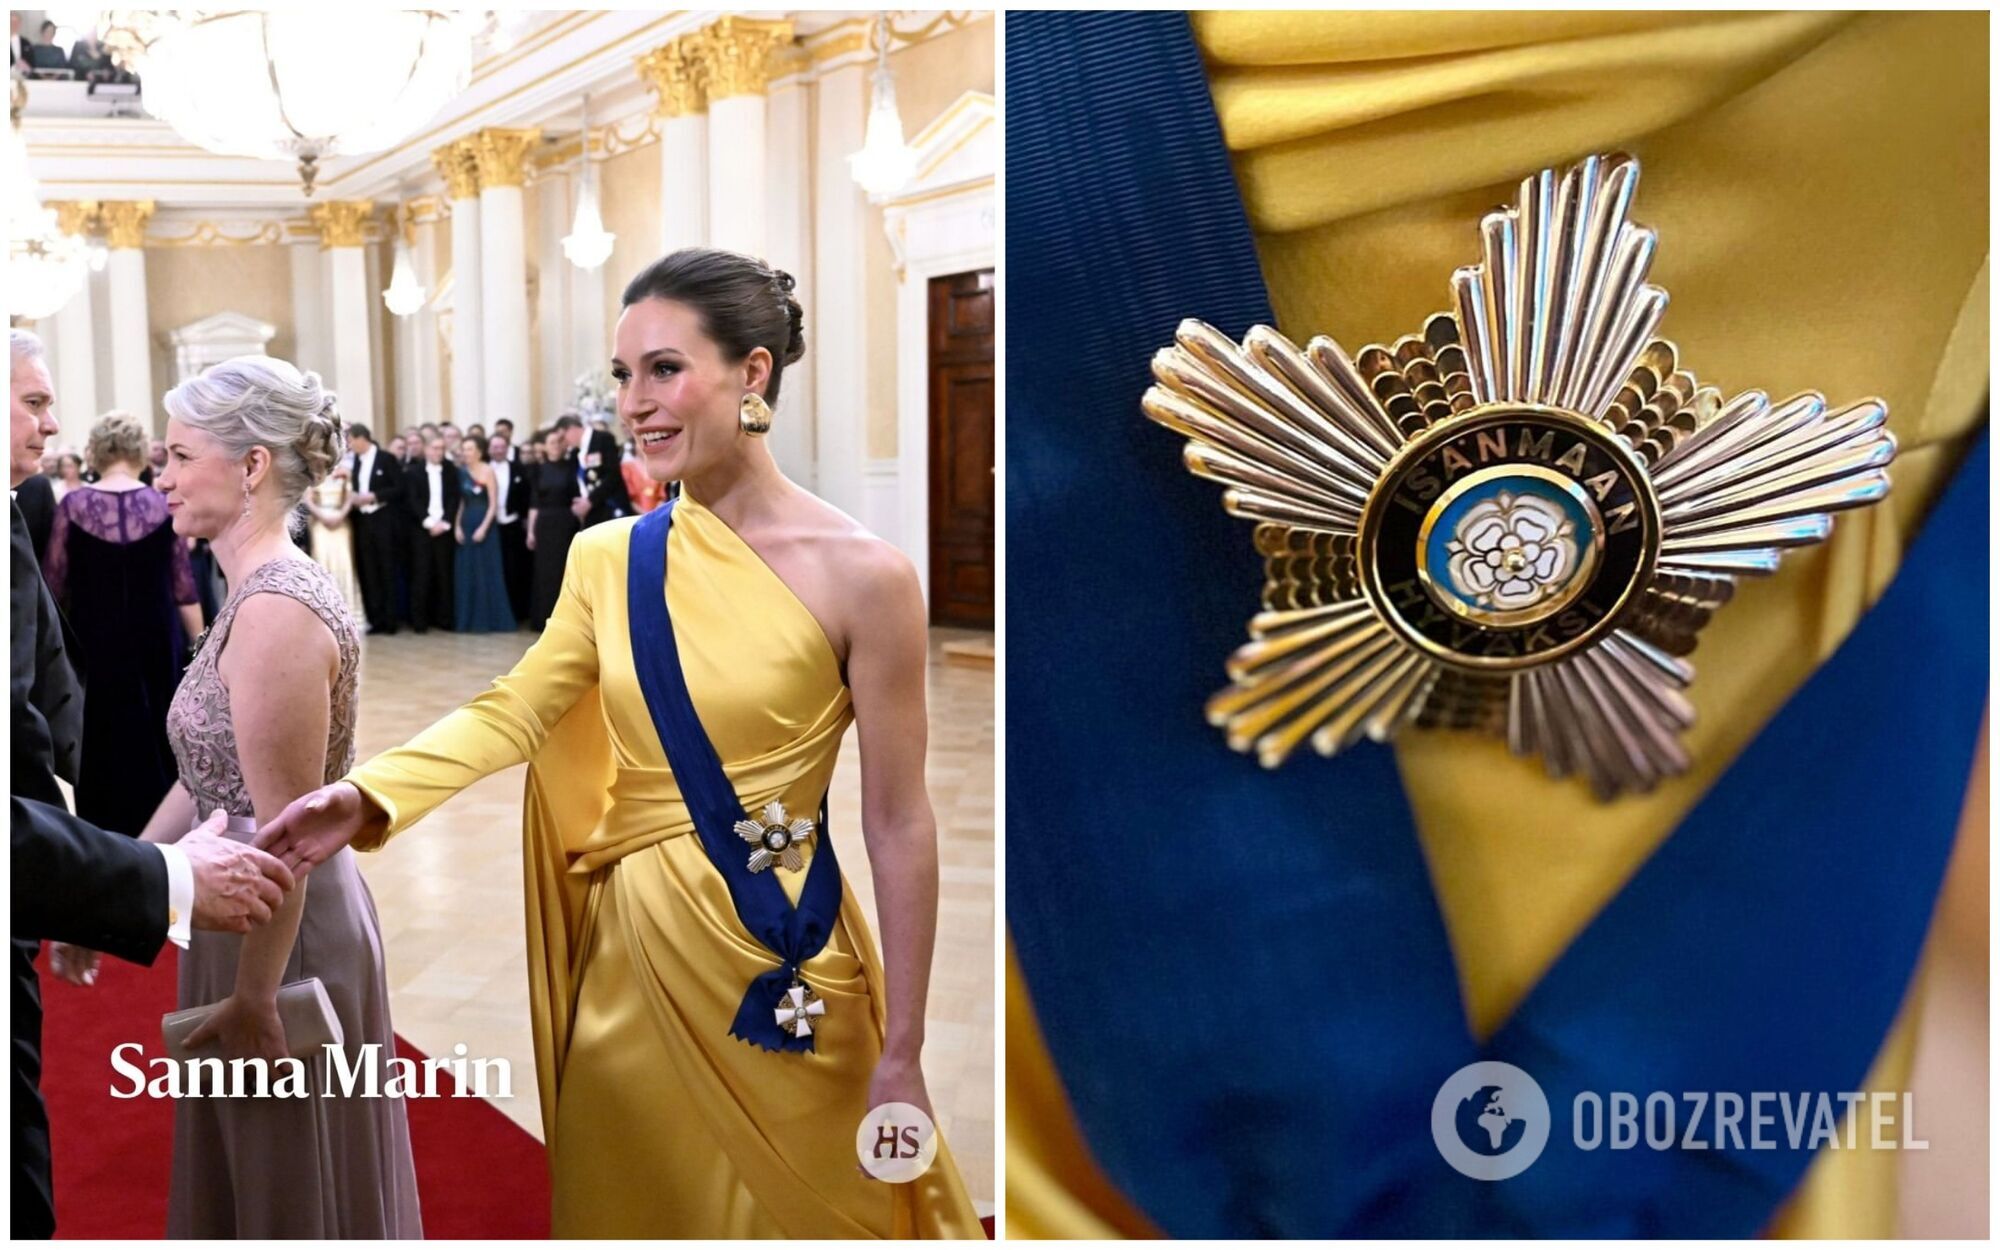 Finland's former prime minister Sanna Marin made a public appearance in a yellow and blue dress